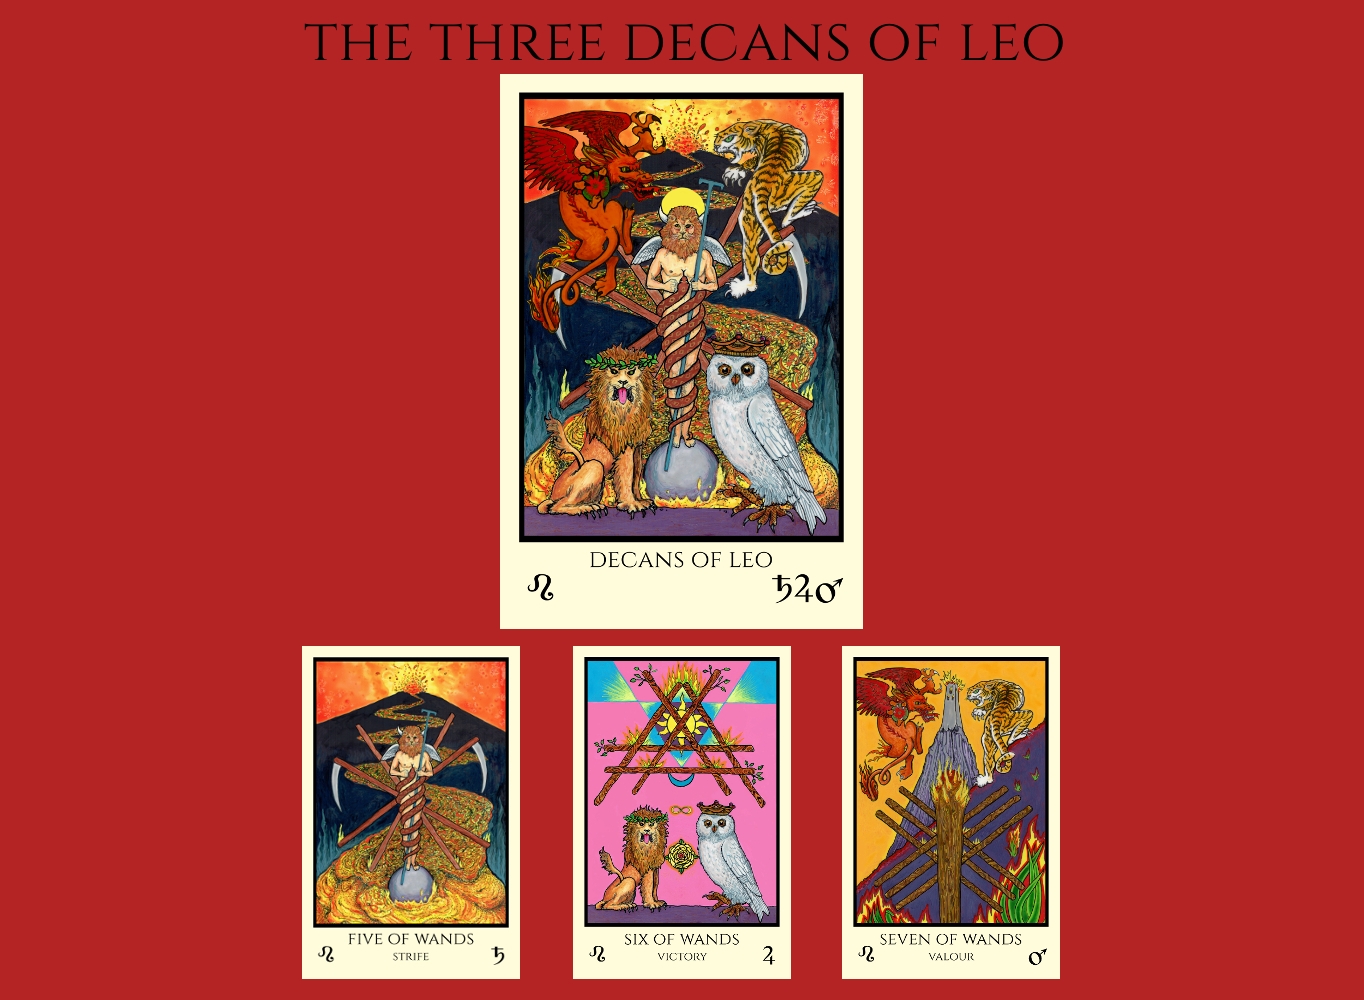 The three decans of Leo